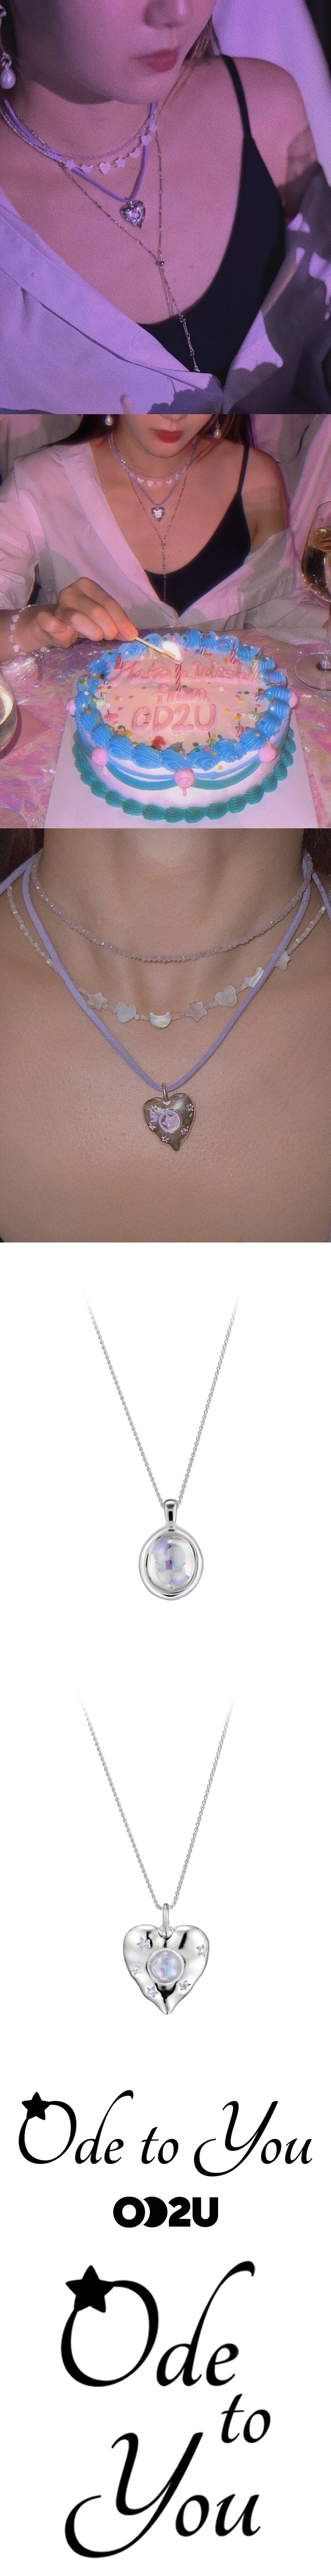 OUR COSMOS NECKLACE